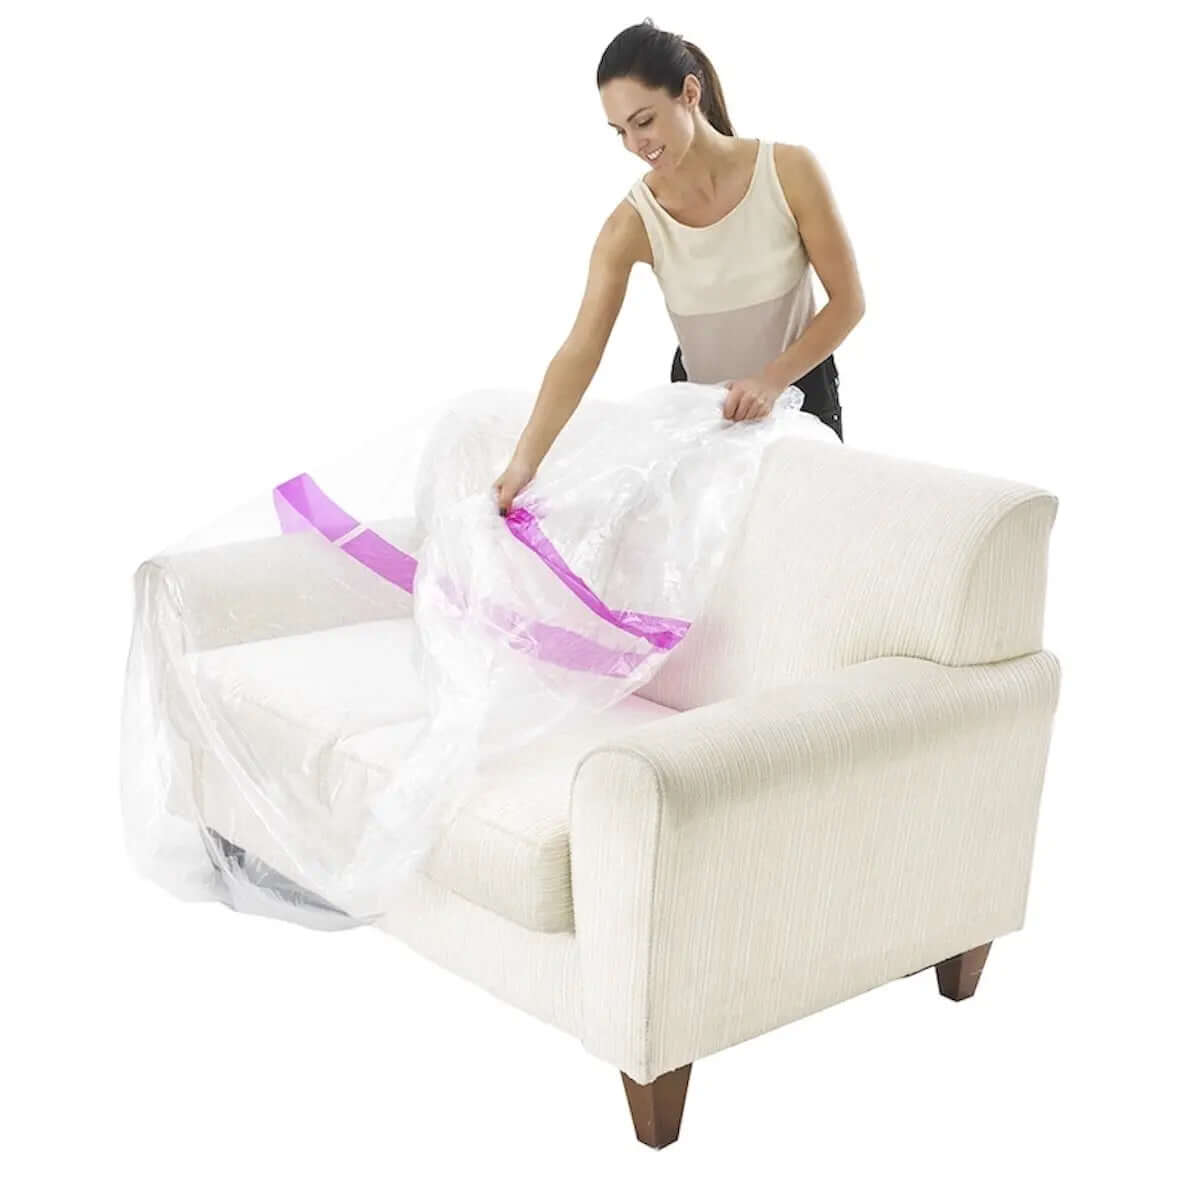 Super Heavy Duty Furniture Covers for Moving and Storage   Storage Bags and Covers Packstore Australia Packstore